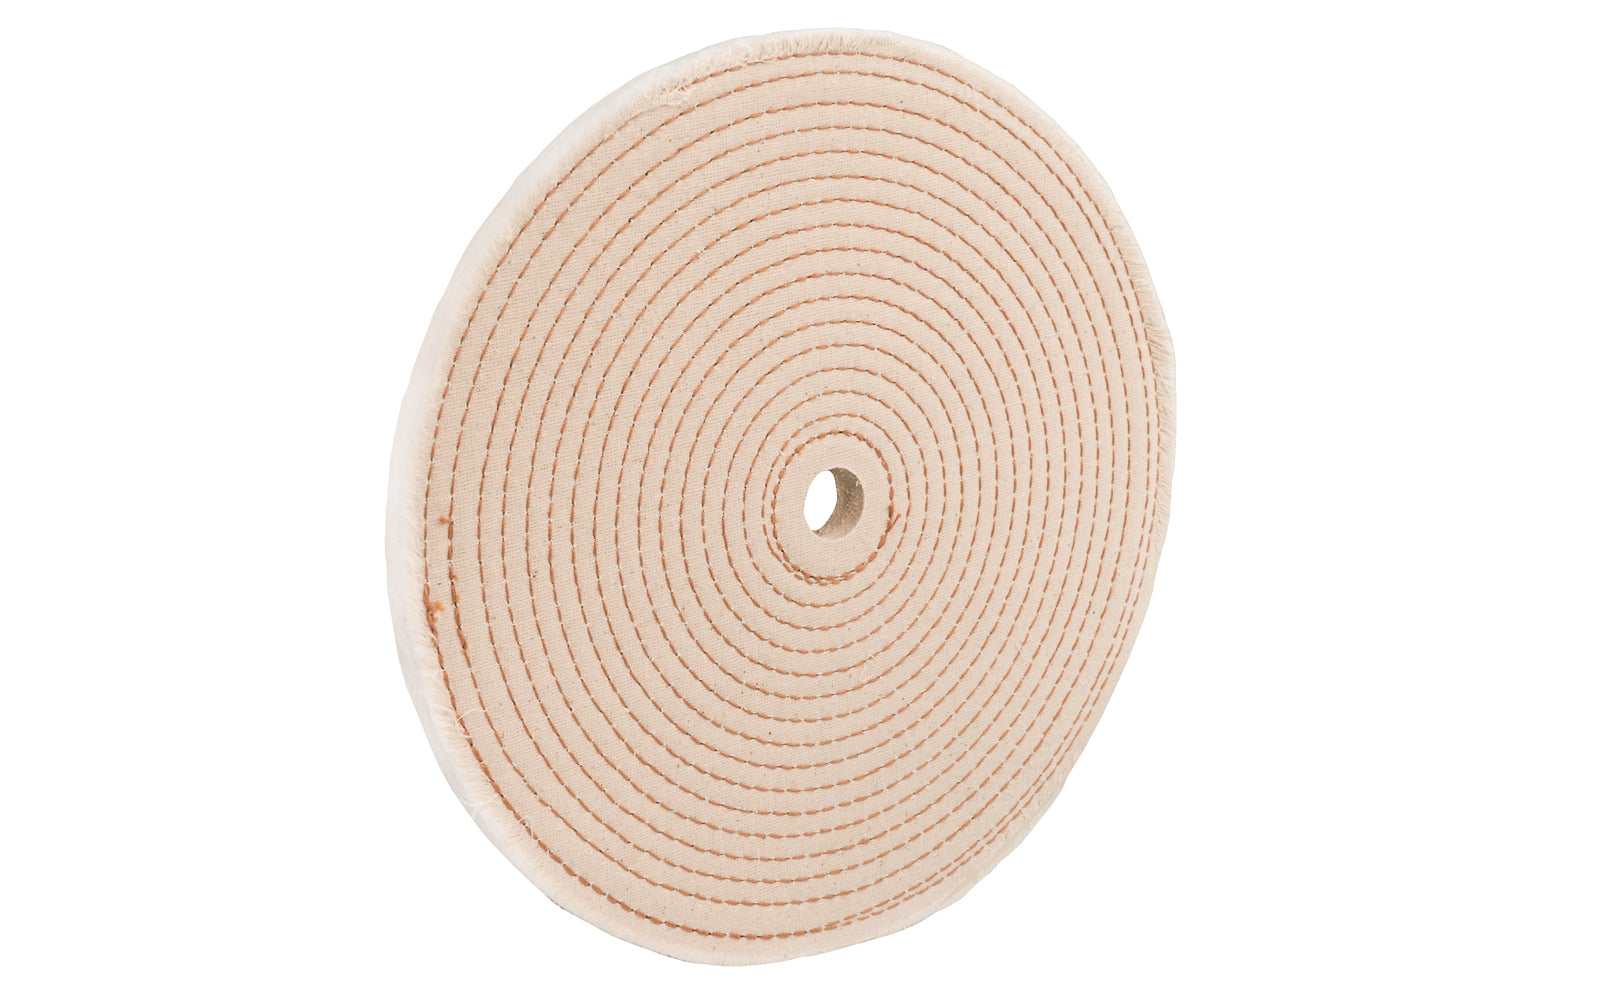 The 10" Spiral Sewn Buffing Wheel ~ 1/2" Thick for aggressive cutting & coarse buffing. 3/4" hole diameter. 1/2" wide thickness. Made in USA. This spiral sewn wheel is designed for prolong service. Good for coarse cutting & buffing, & flexible grinding. Stiffer cotton sheeting - Held together lockstitch sewing